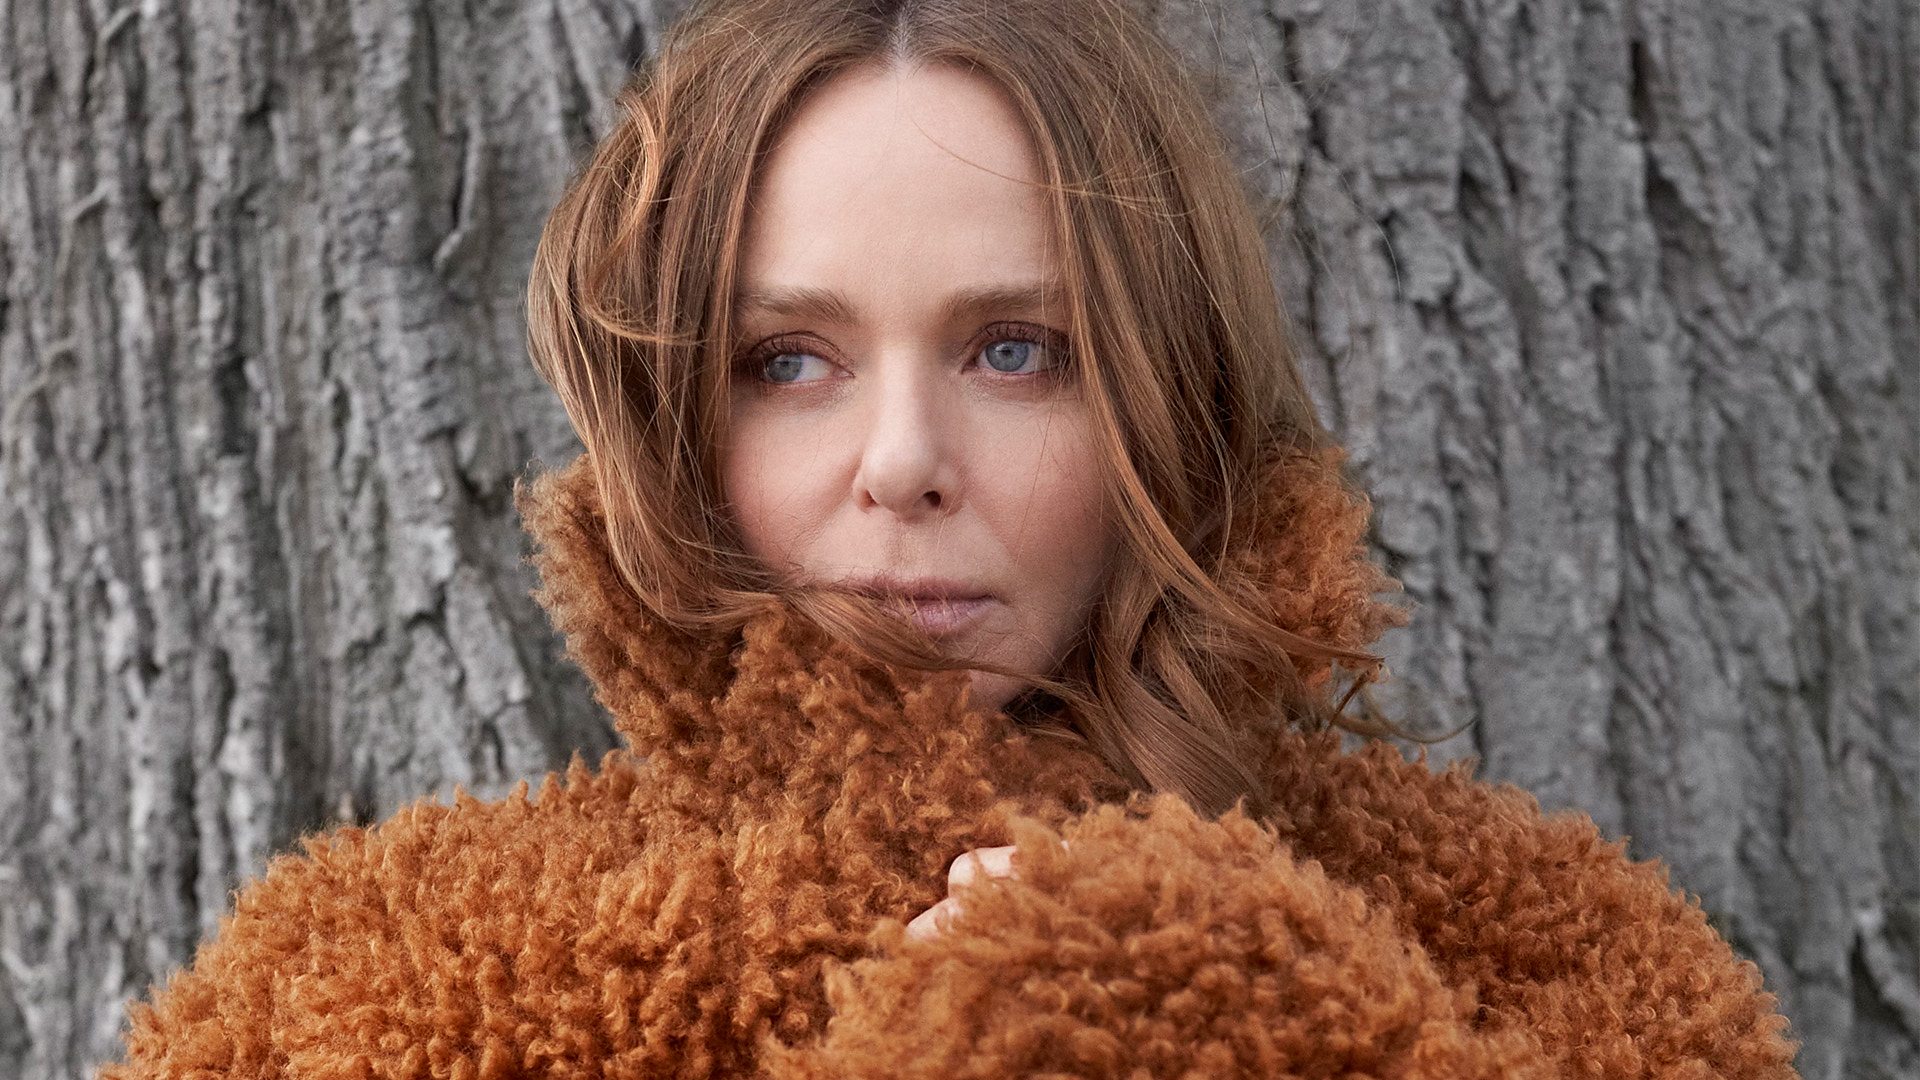 Stella McCartney to give spoken word performance on environment at King's  coronation concert